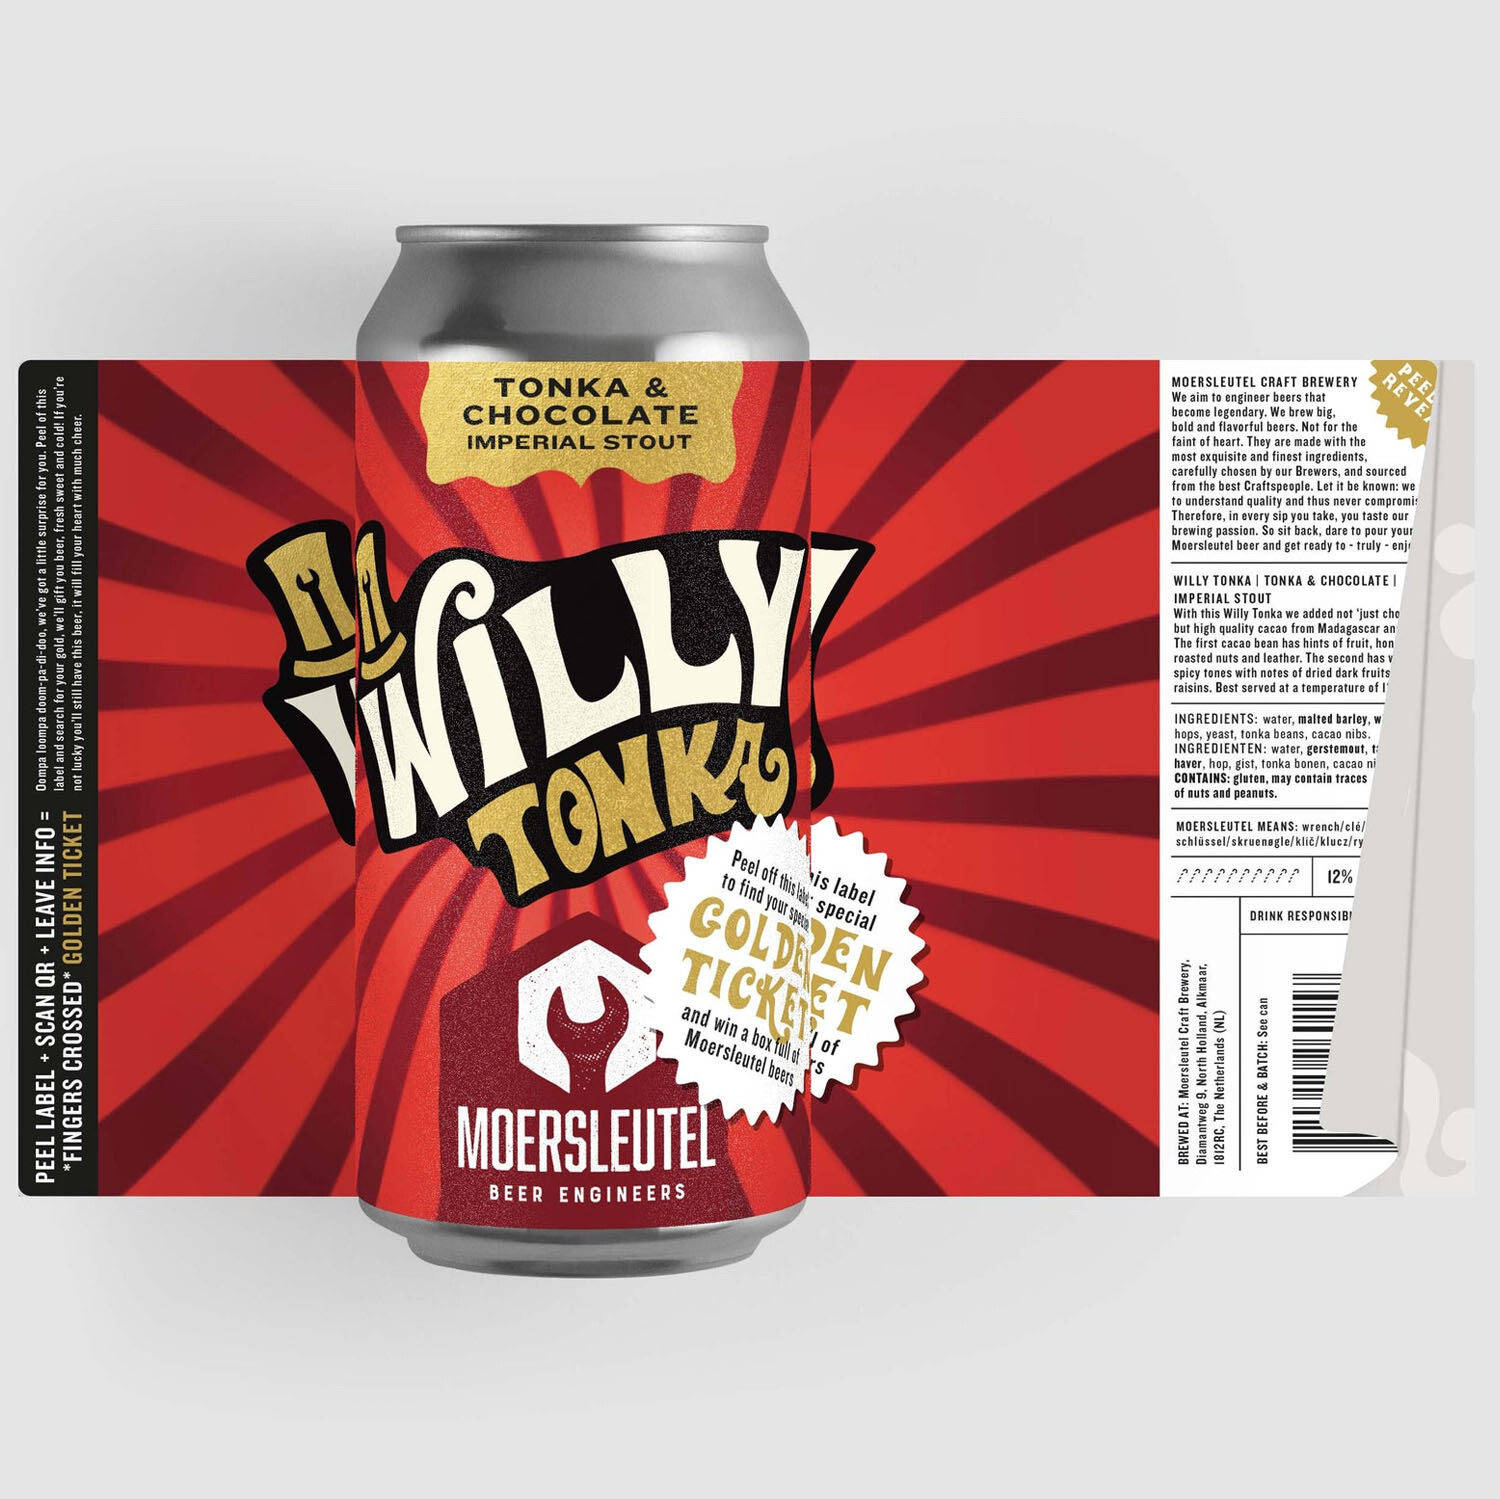 De Moersleutel Willy Tonka and Chocolate Stout